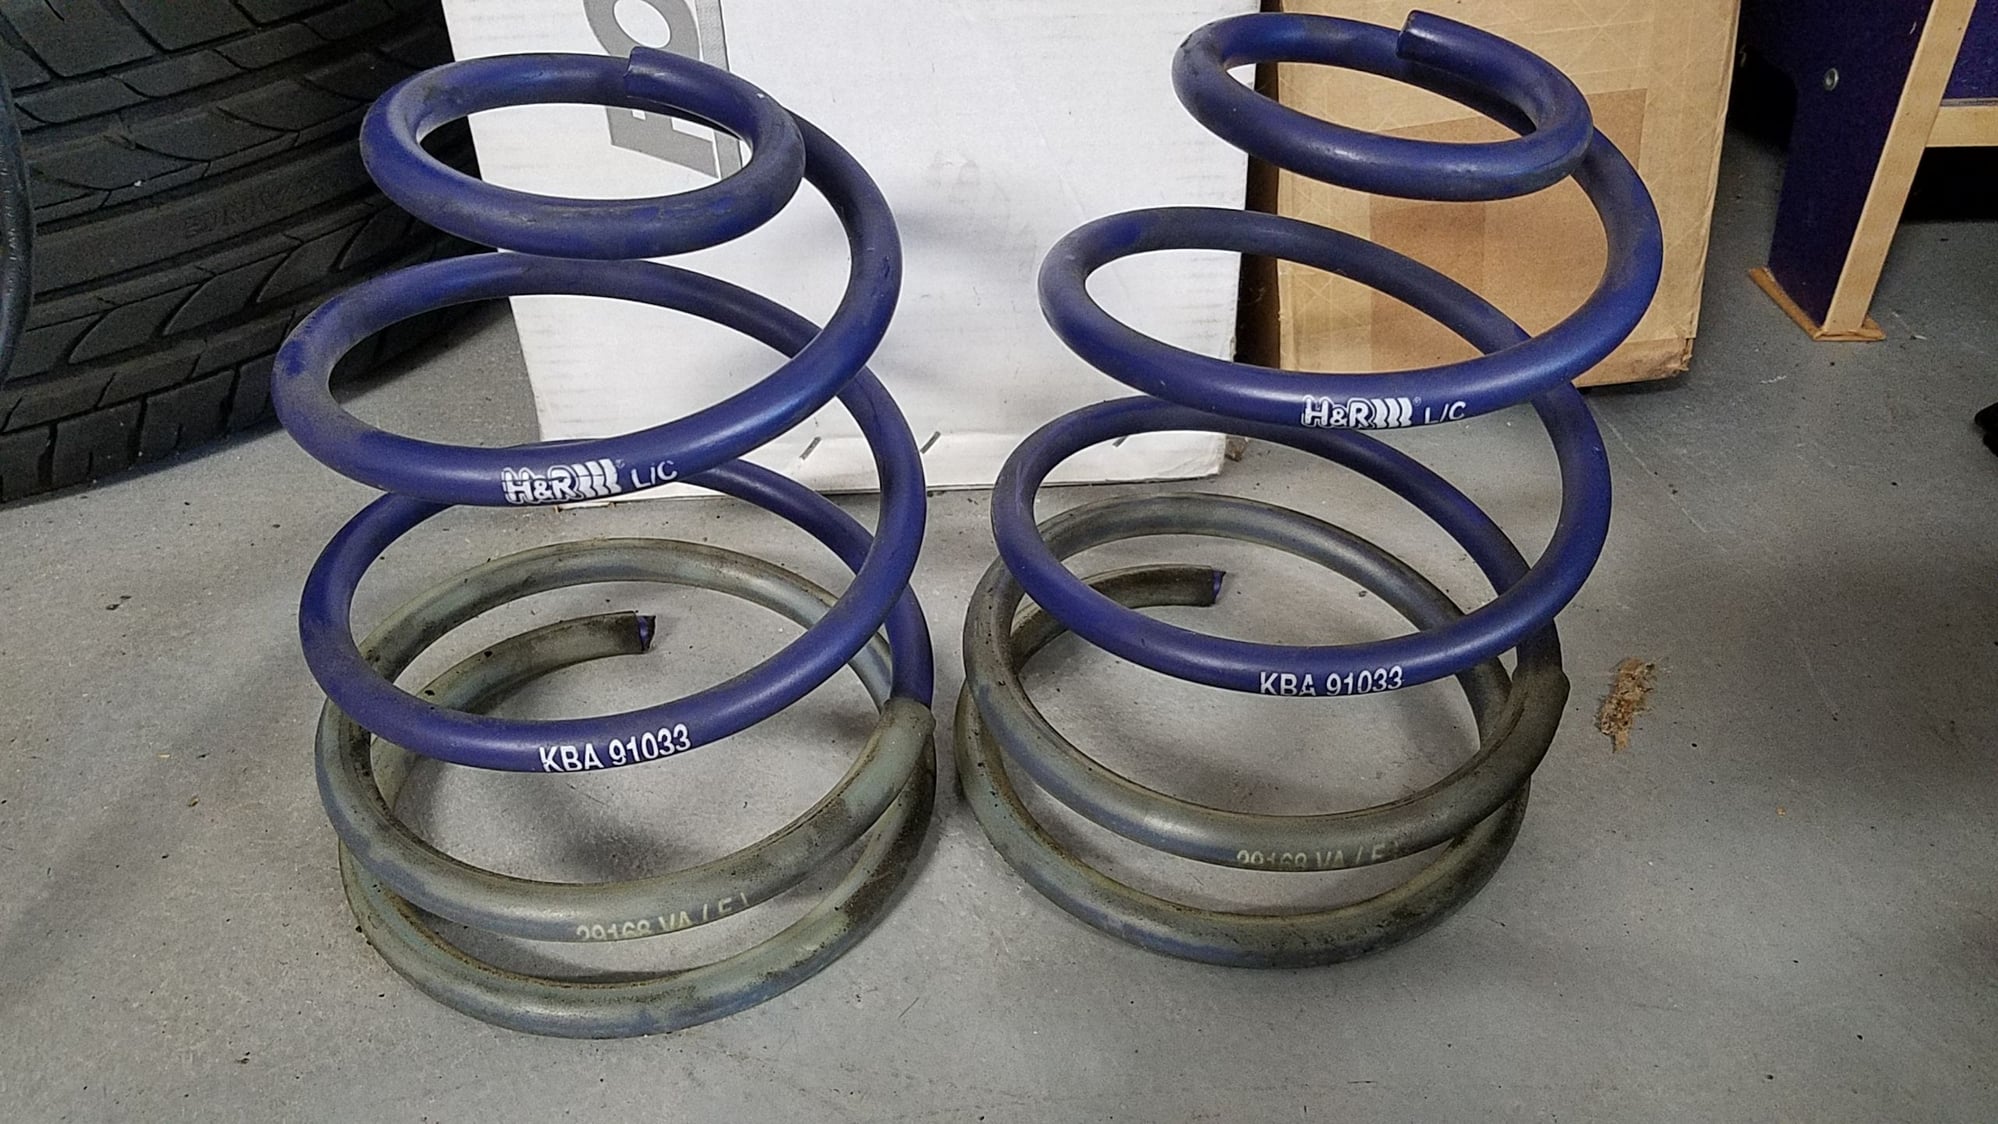 Steering/Suspension - H&R Lowering Springs 987 Cayman 986 Boxster excellent condition - Used - 1999 to 2012 Porsche Boxster - 2006 to 2012 Porsche Cayman - Corte Madera, CA 94925, United States